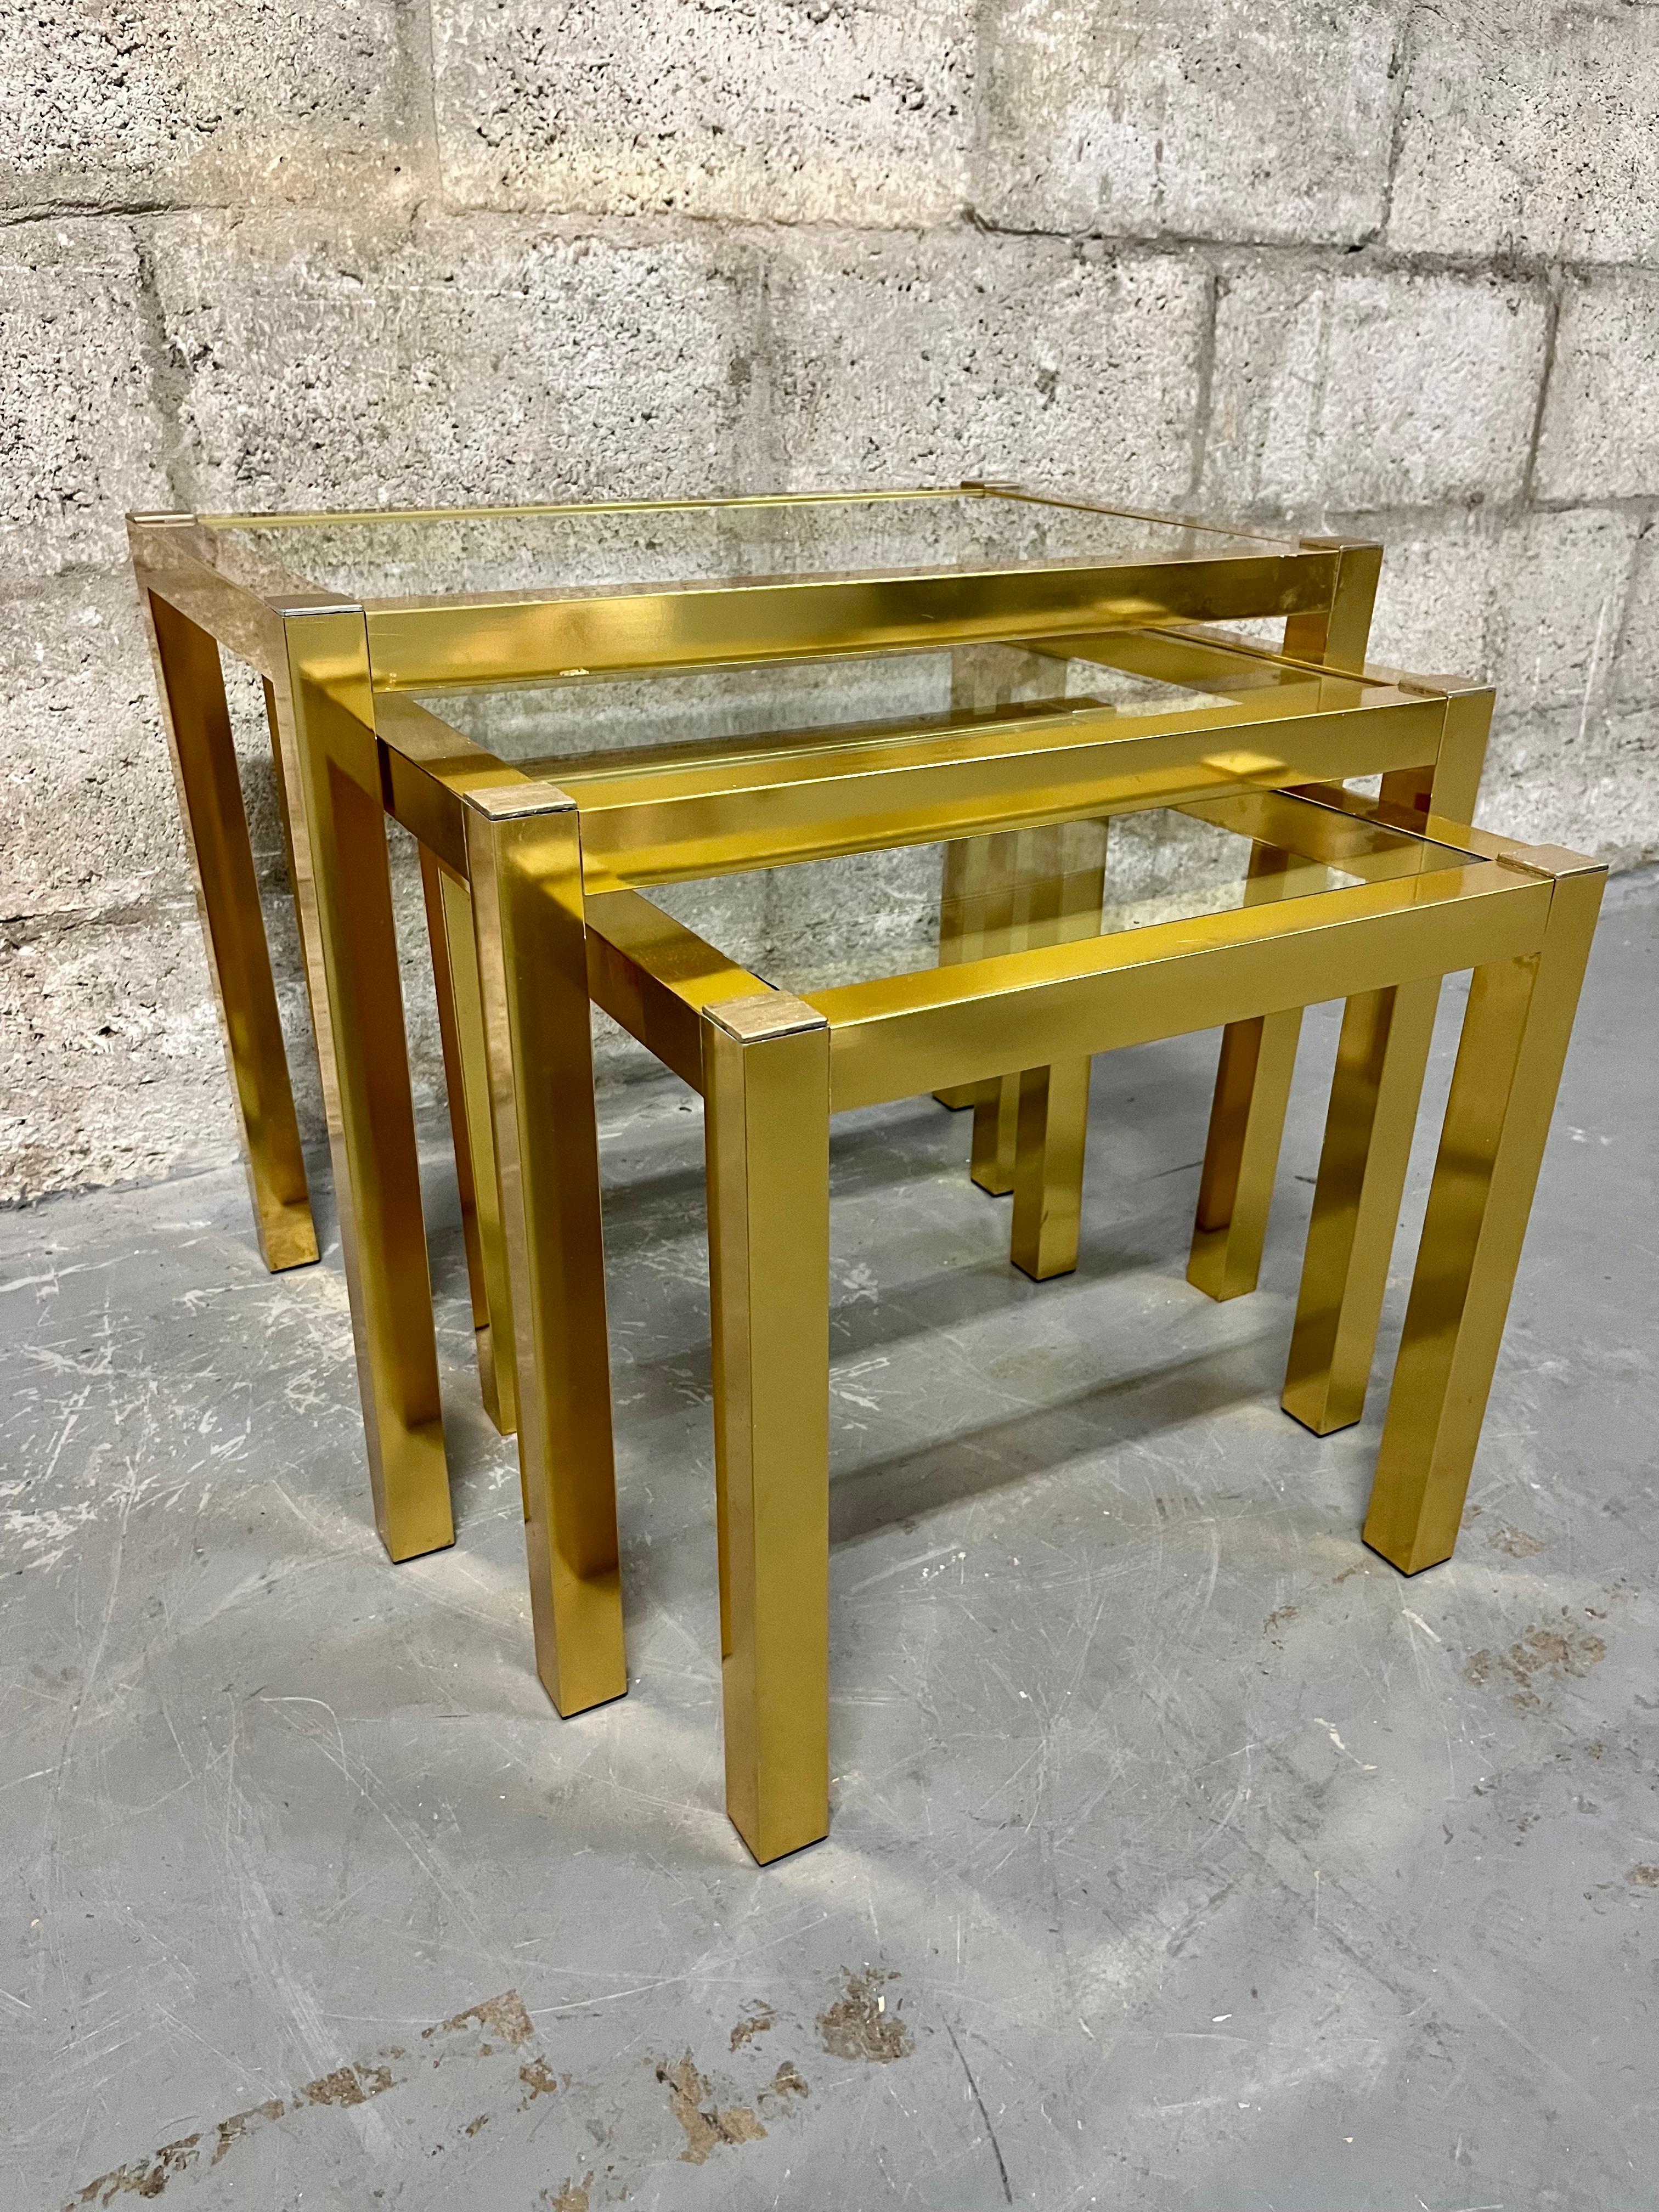 Set of Three Mid Century Brass Anodized Aluminum Nesting Tables. Circa 1960s 
Feature 1 Sq. Inch Brass Anodized aluminum tubing frames with removable glass tops. 
In very good original condition with minor signs of wear and age. There are some minor